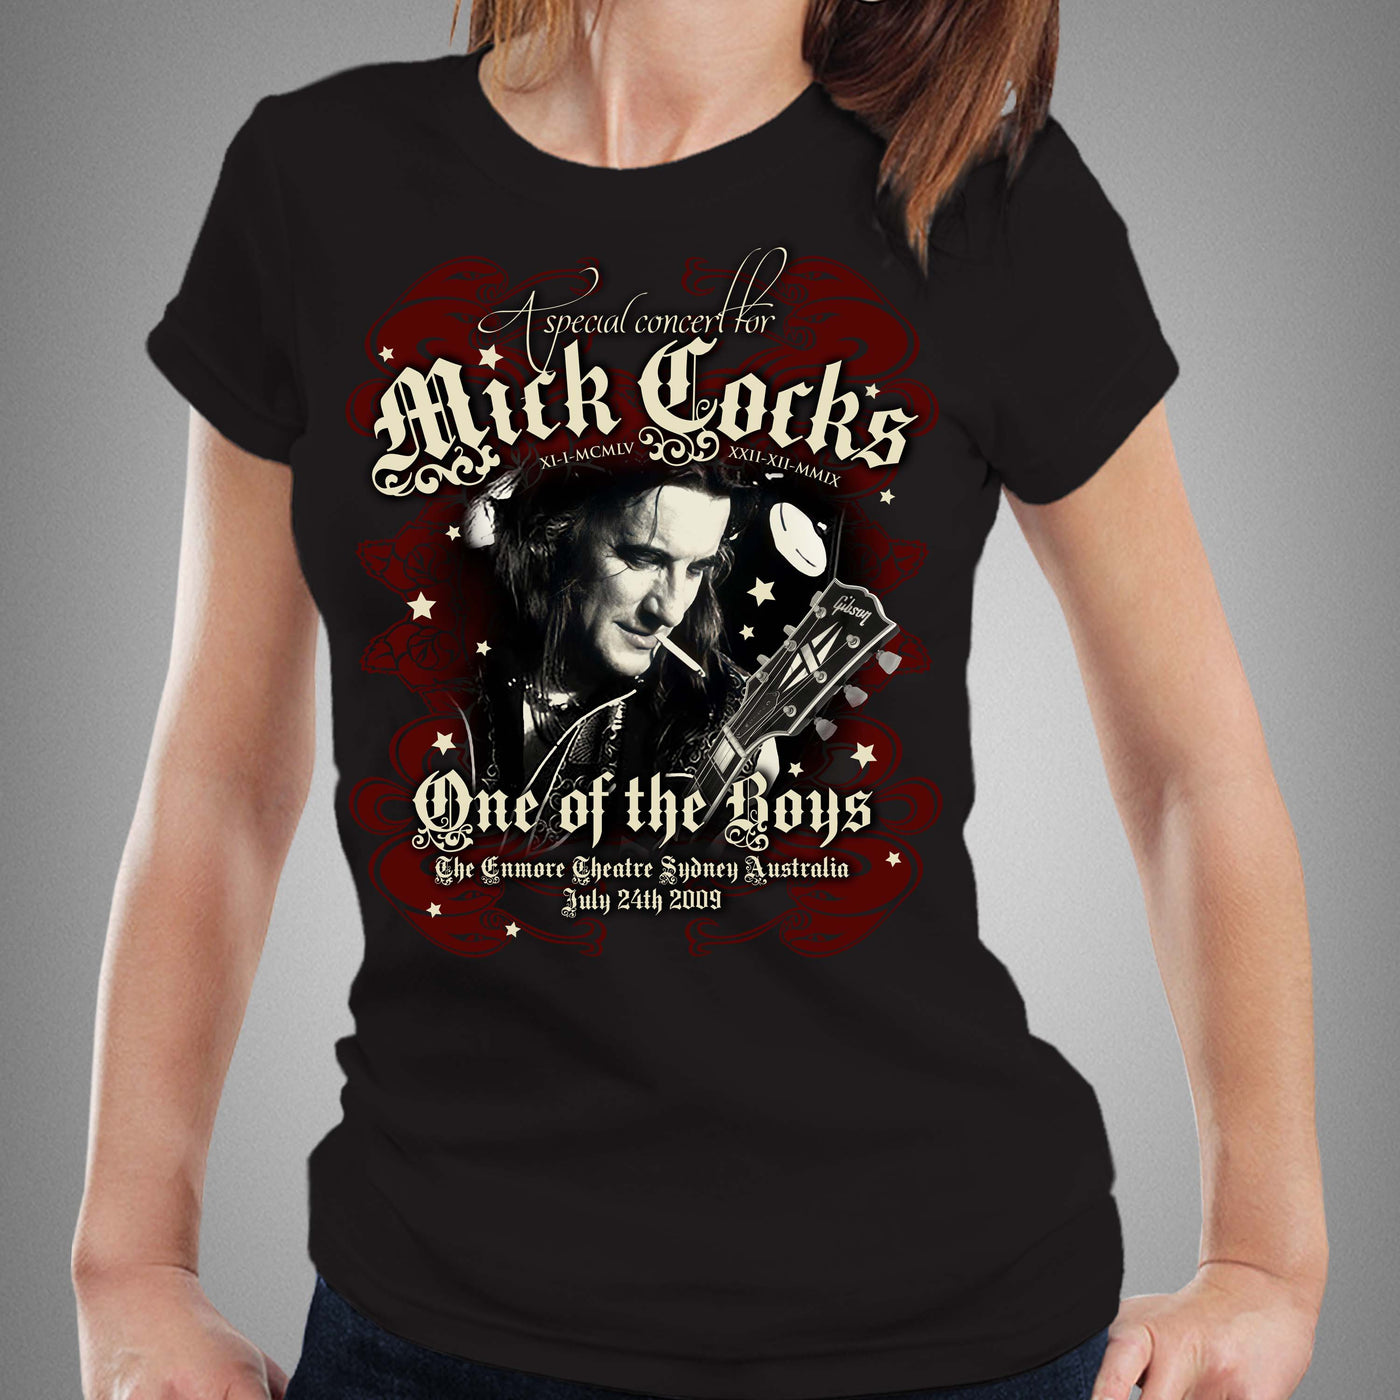 Mick Cocks Tribute Concert -Special Edition - Fem - RED